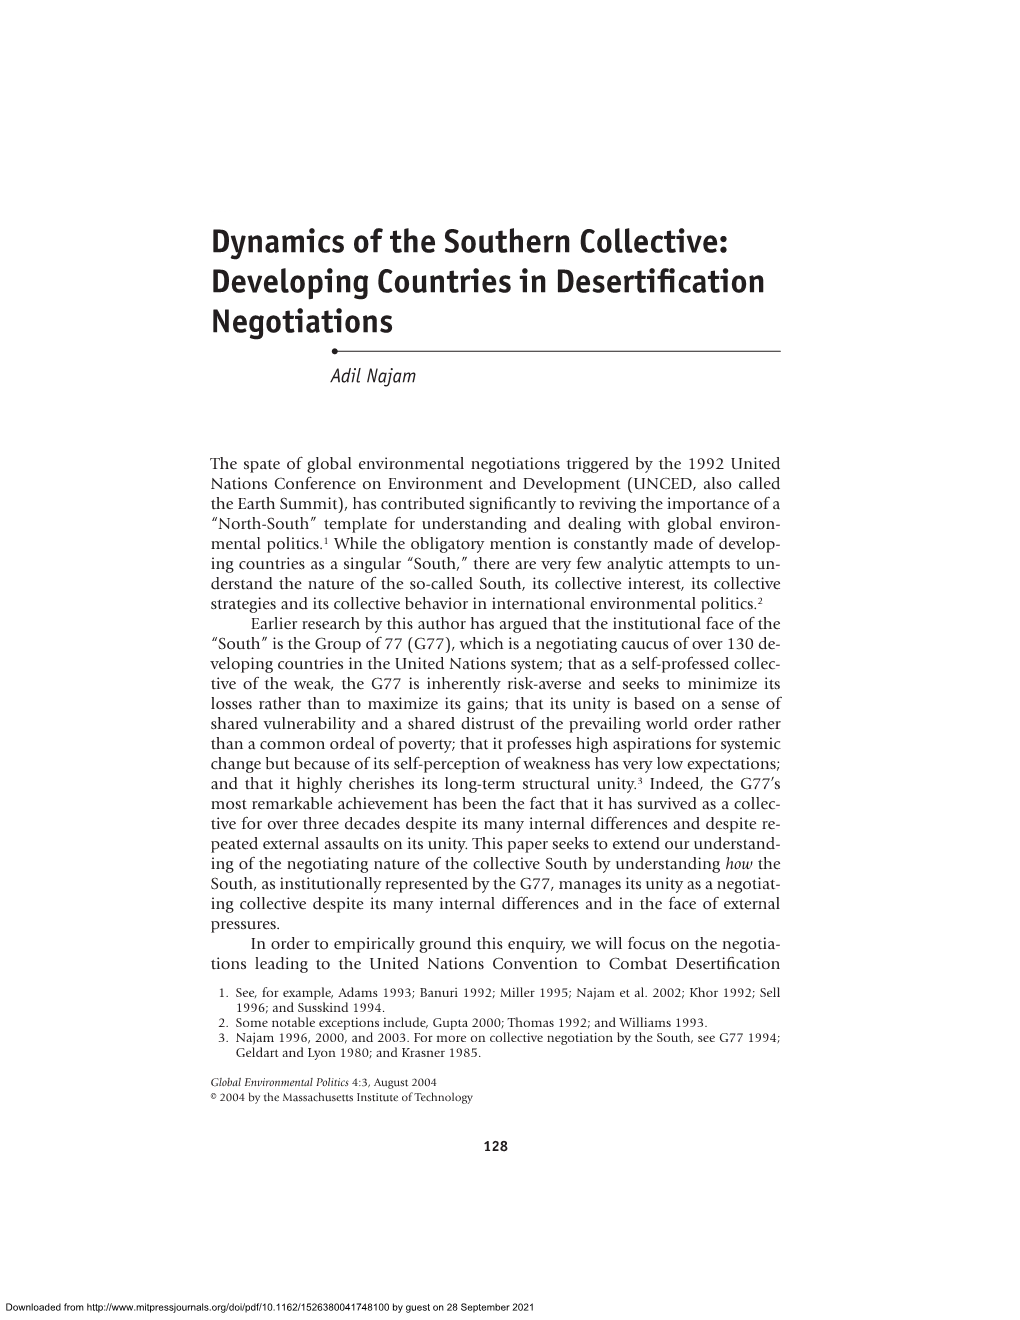 Dynamics of the Southern Collective: Developing Countries in Desertiªcation Negotiations • Adil Najam